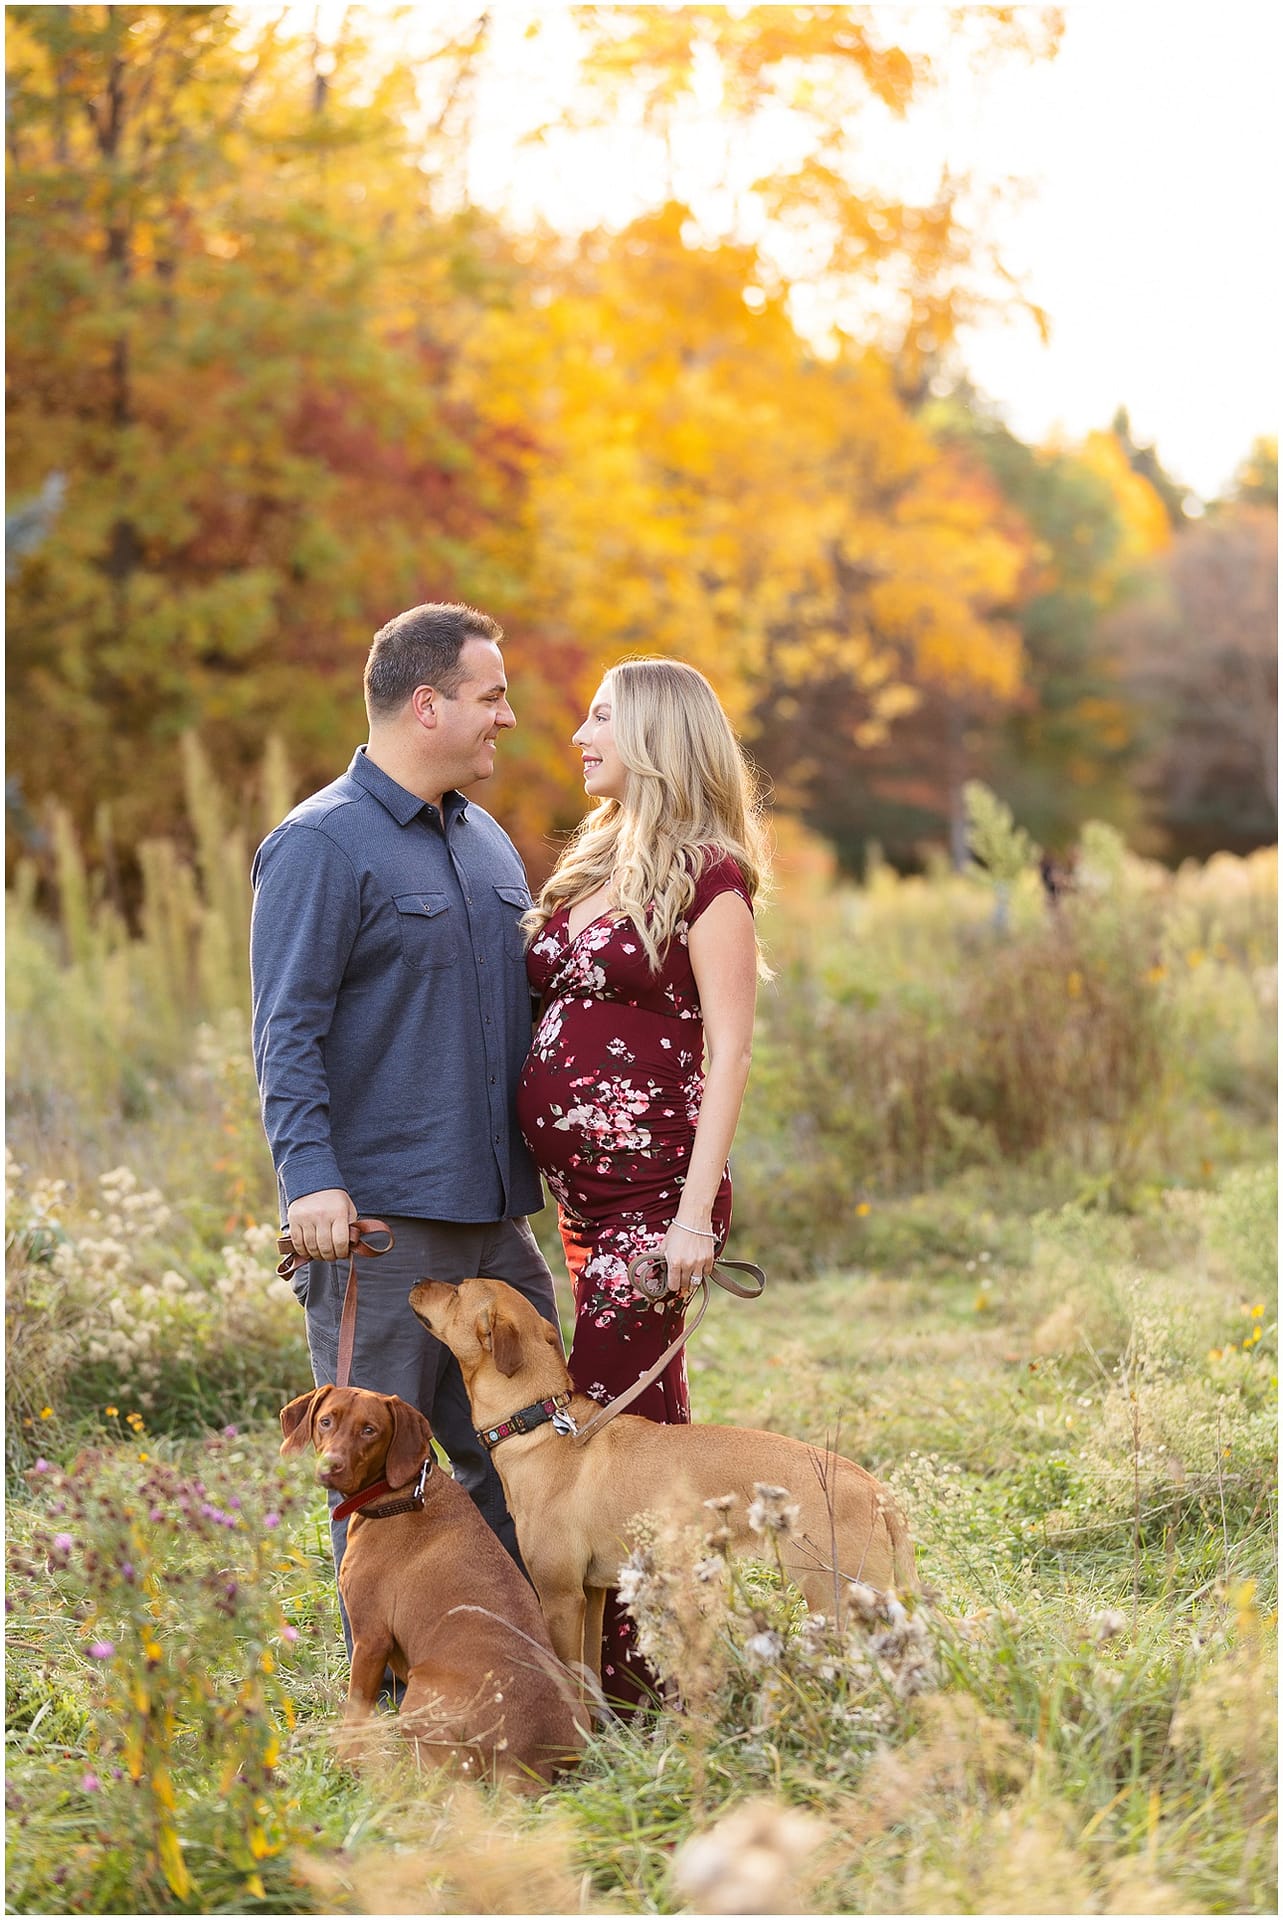 Couple looks at one another lovingly during fall maternity session. Photo by Tiffany Hix Photography.